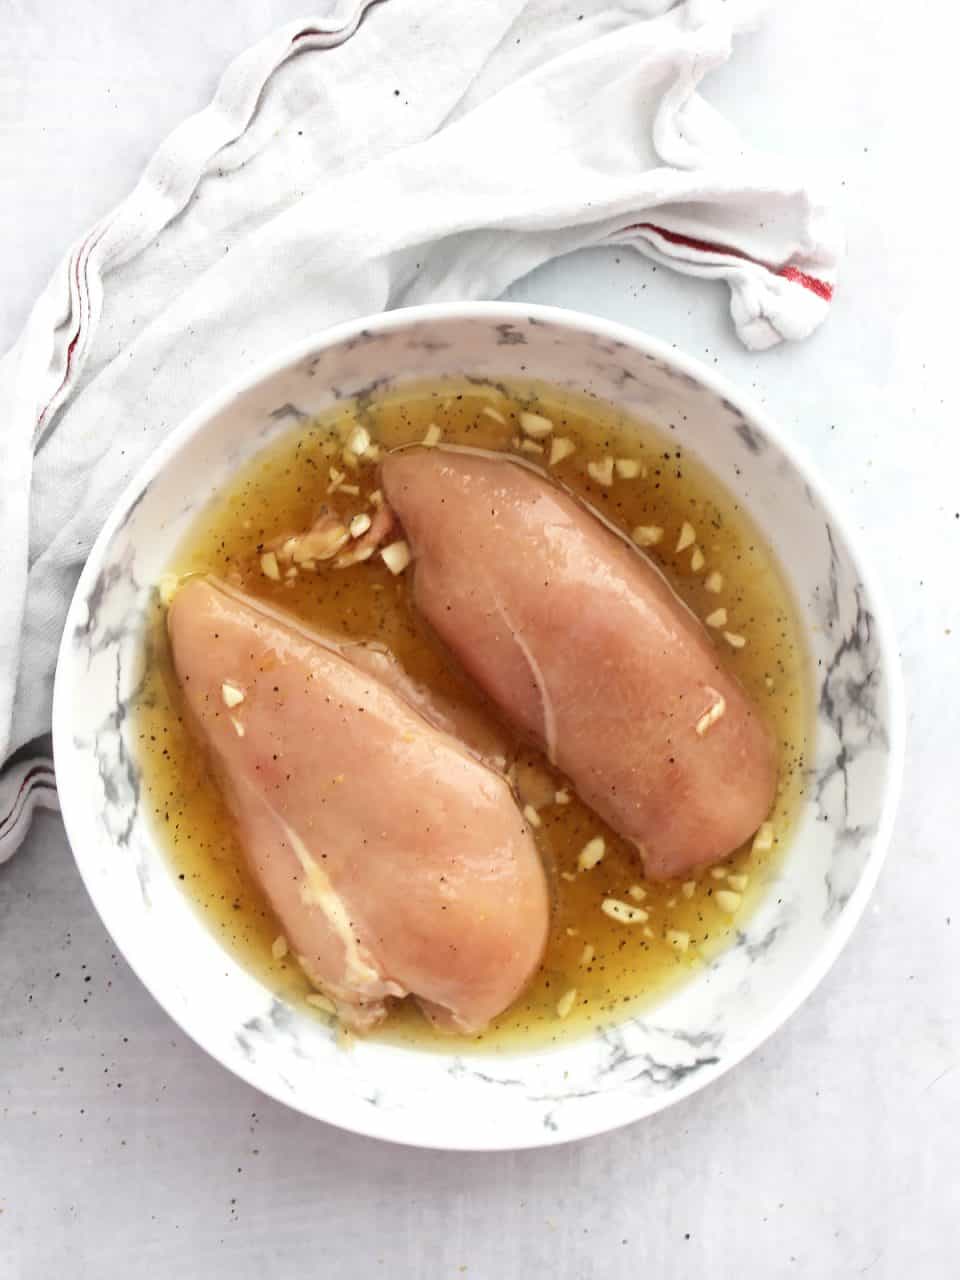 Tow chicken breasts being marinated in the lemon and honey sauce.